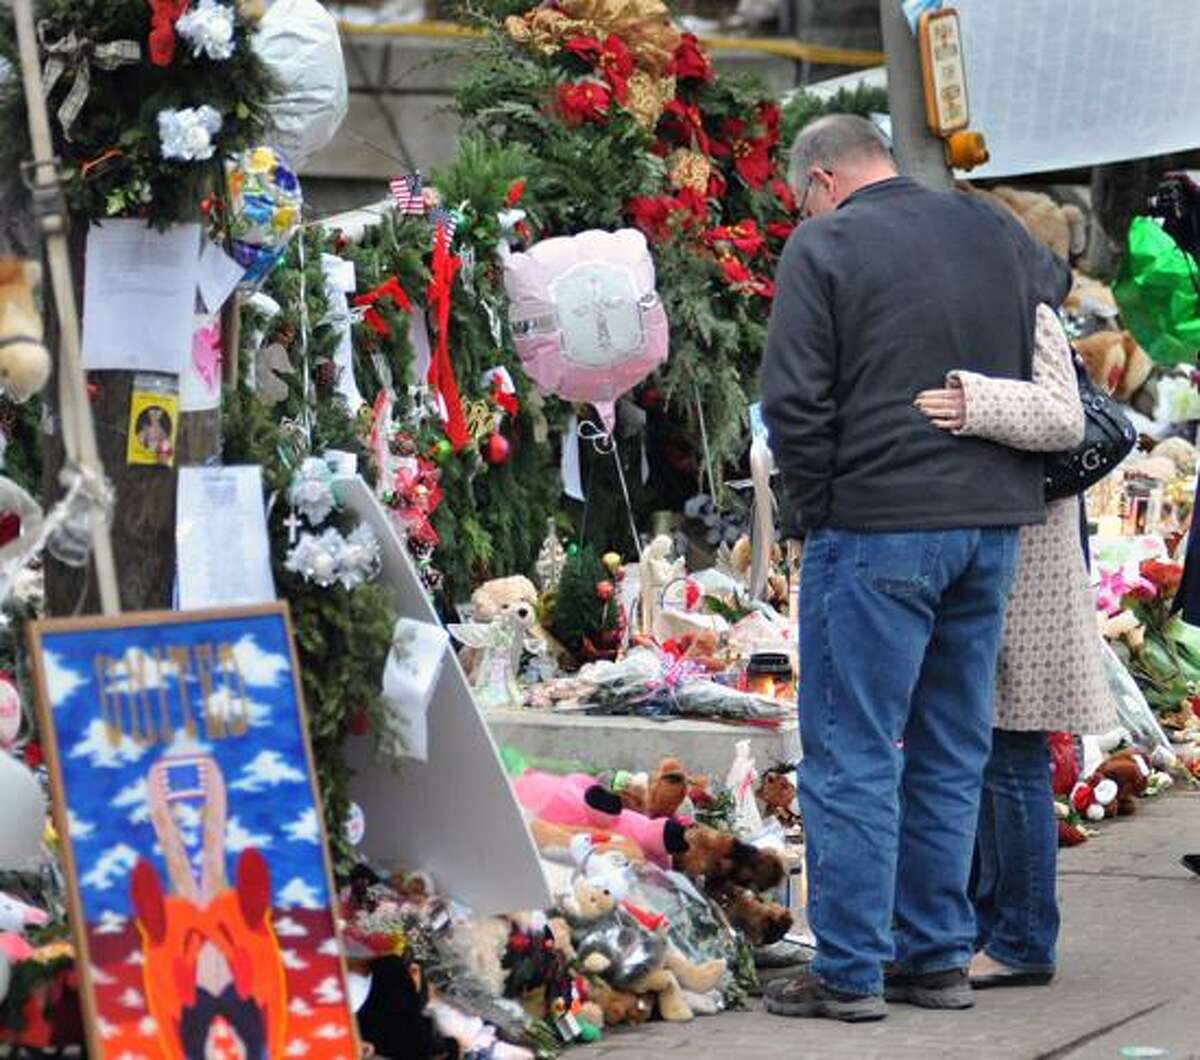 Sandy Hook-- People look over the ever growing memorials in the center of Sandy hook on Weds. Photo-Peter Casolino 12/26/12,